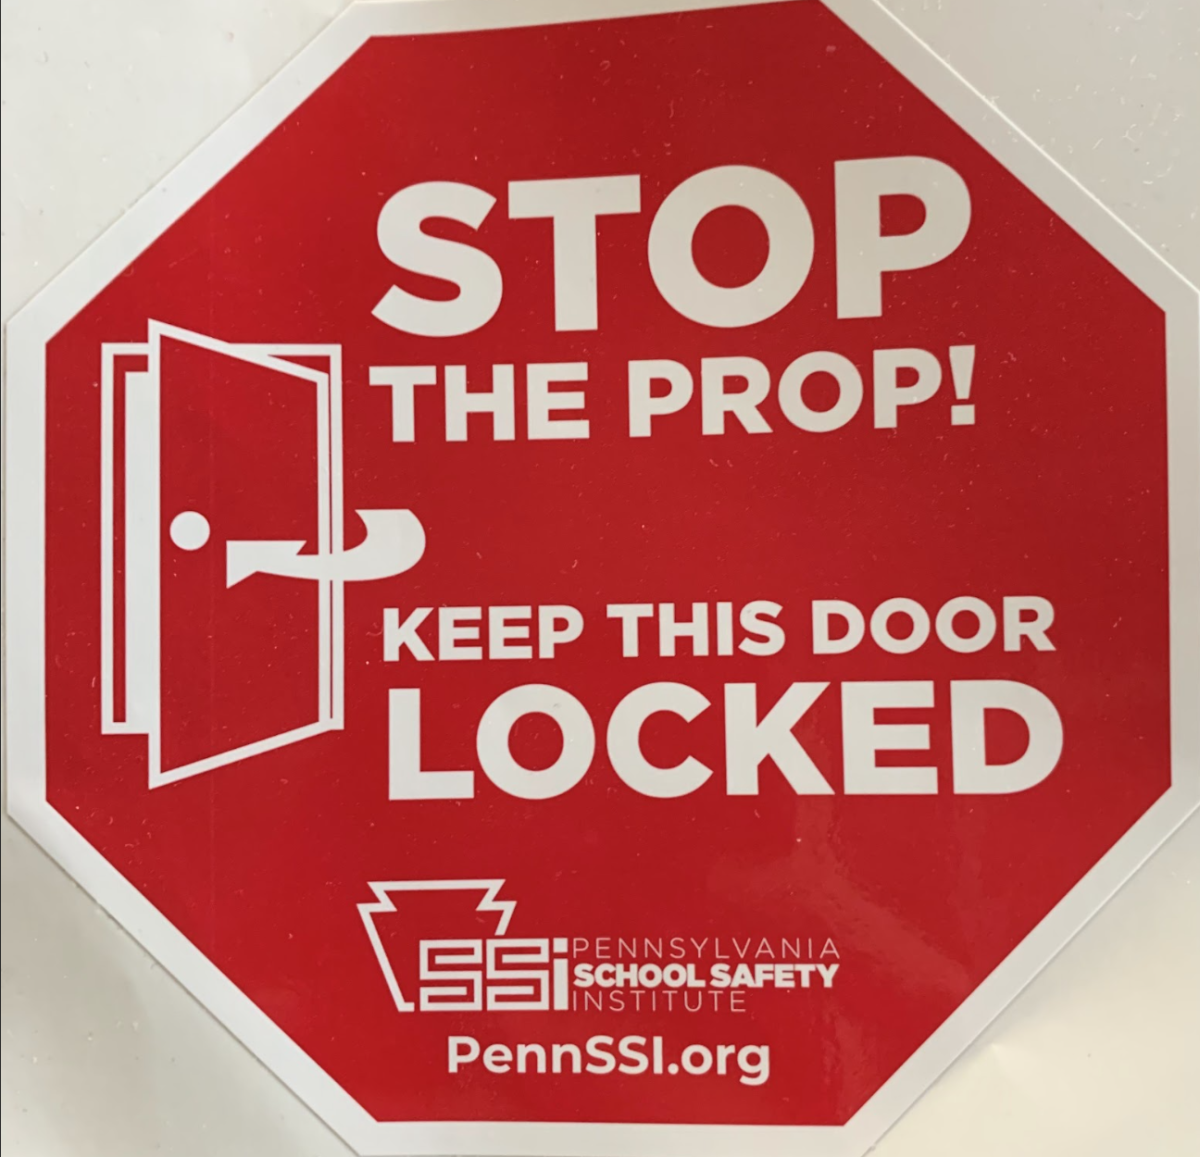 Sticker from Garrett Seddon telling people to “Stop The Prop”. These stickers will be found on doors that have been propped open to encourage students to stop leaving doors open.